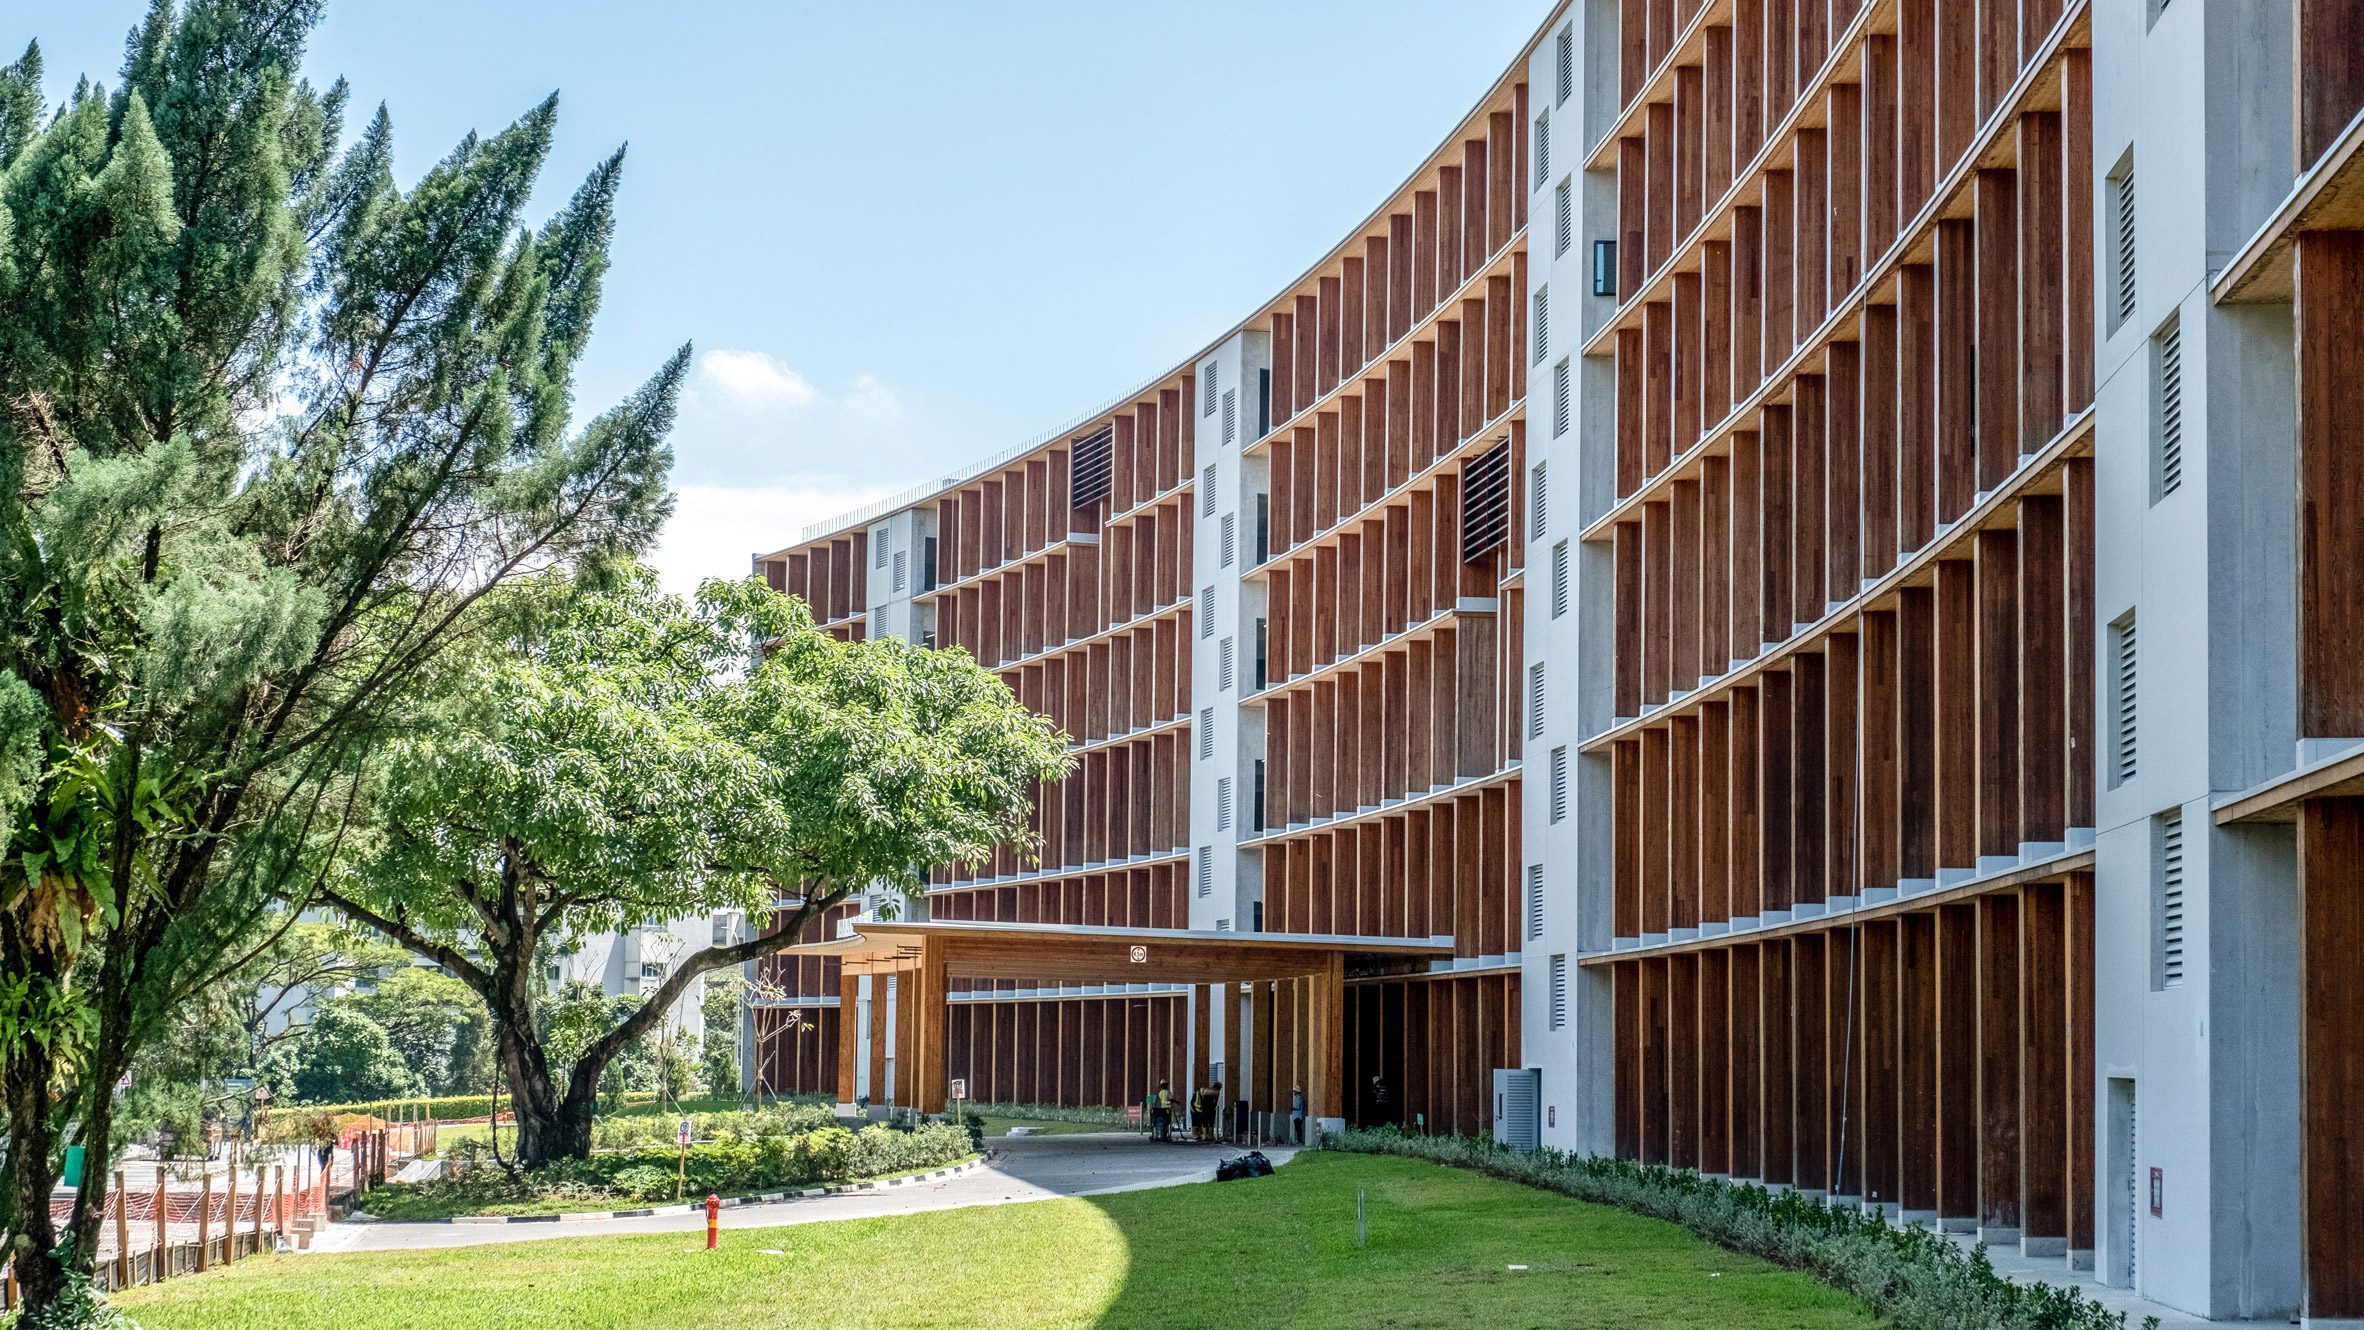 Exterior of Gaia at Nanyang Technological University in Singapore by Toyo Ito